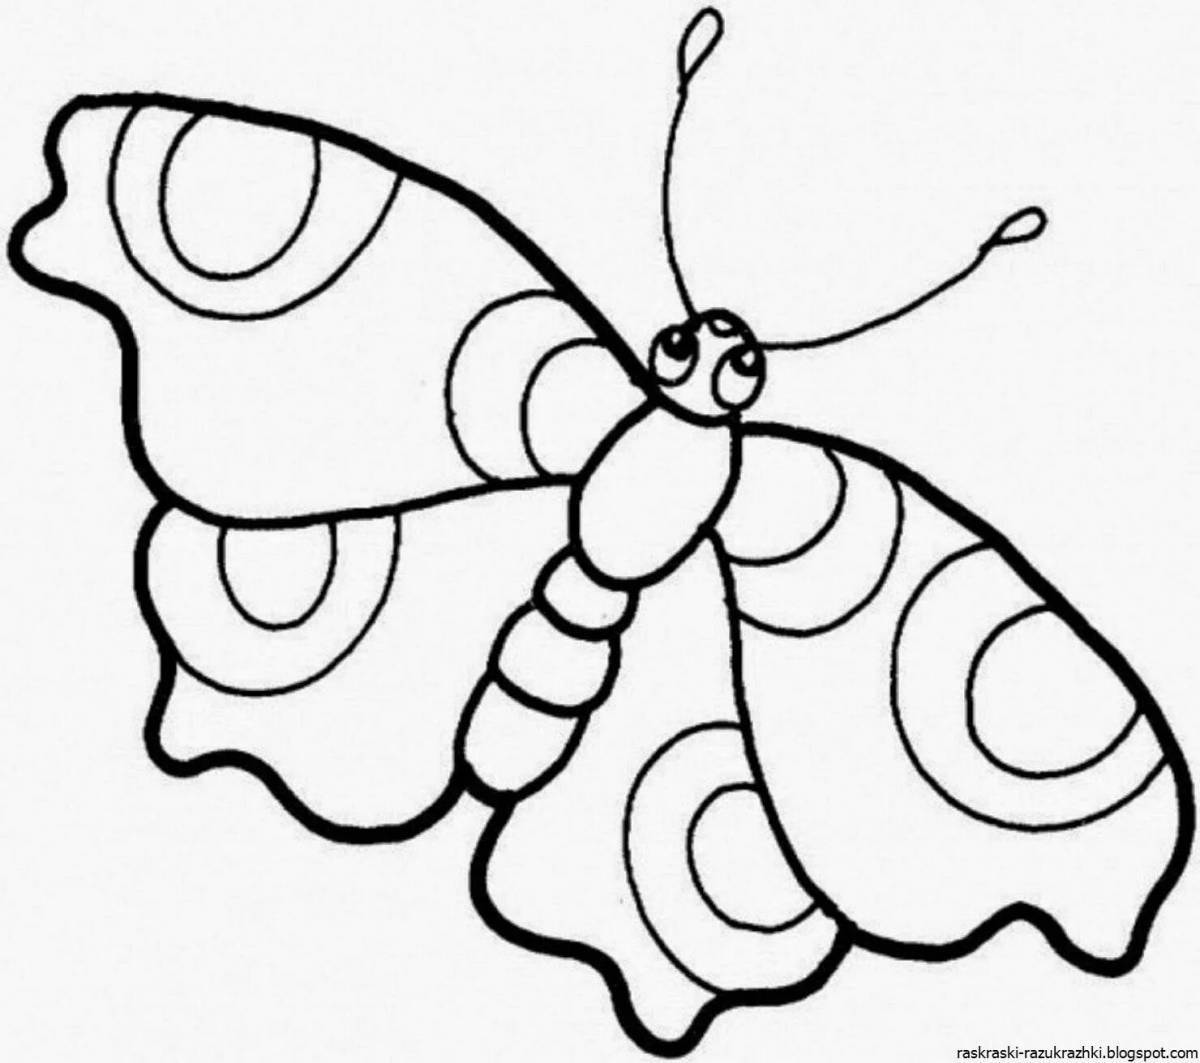 Live butterfly coloring book for children 4-5 years old